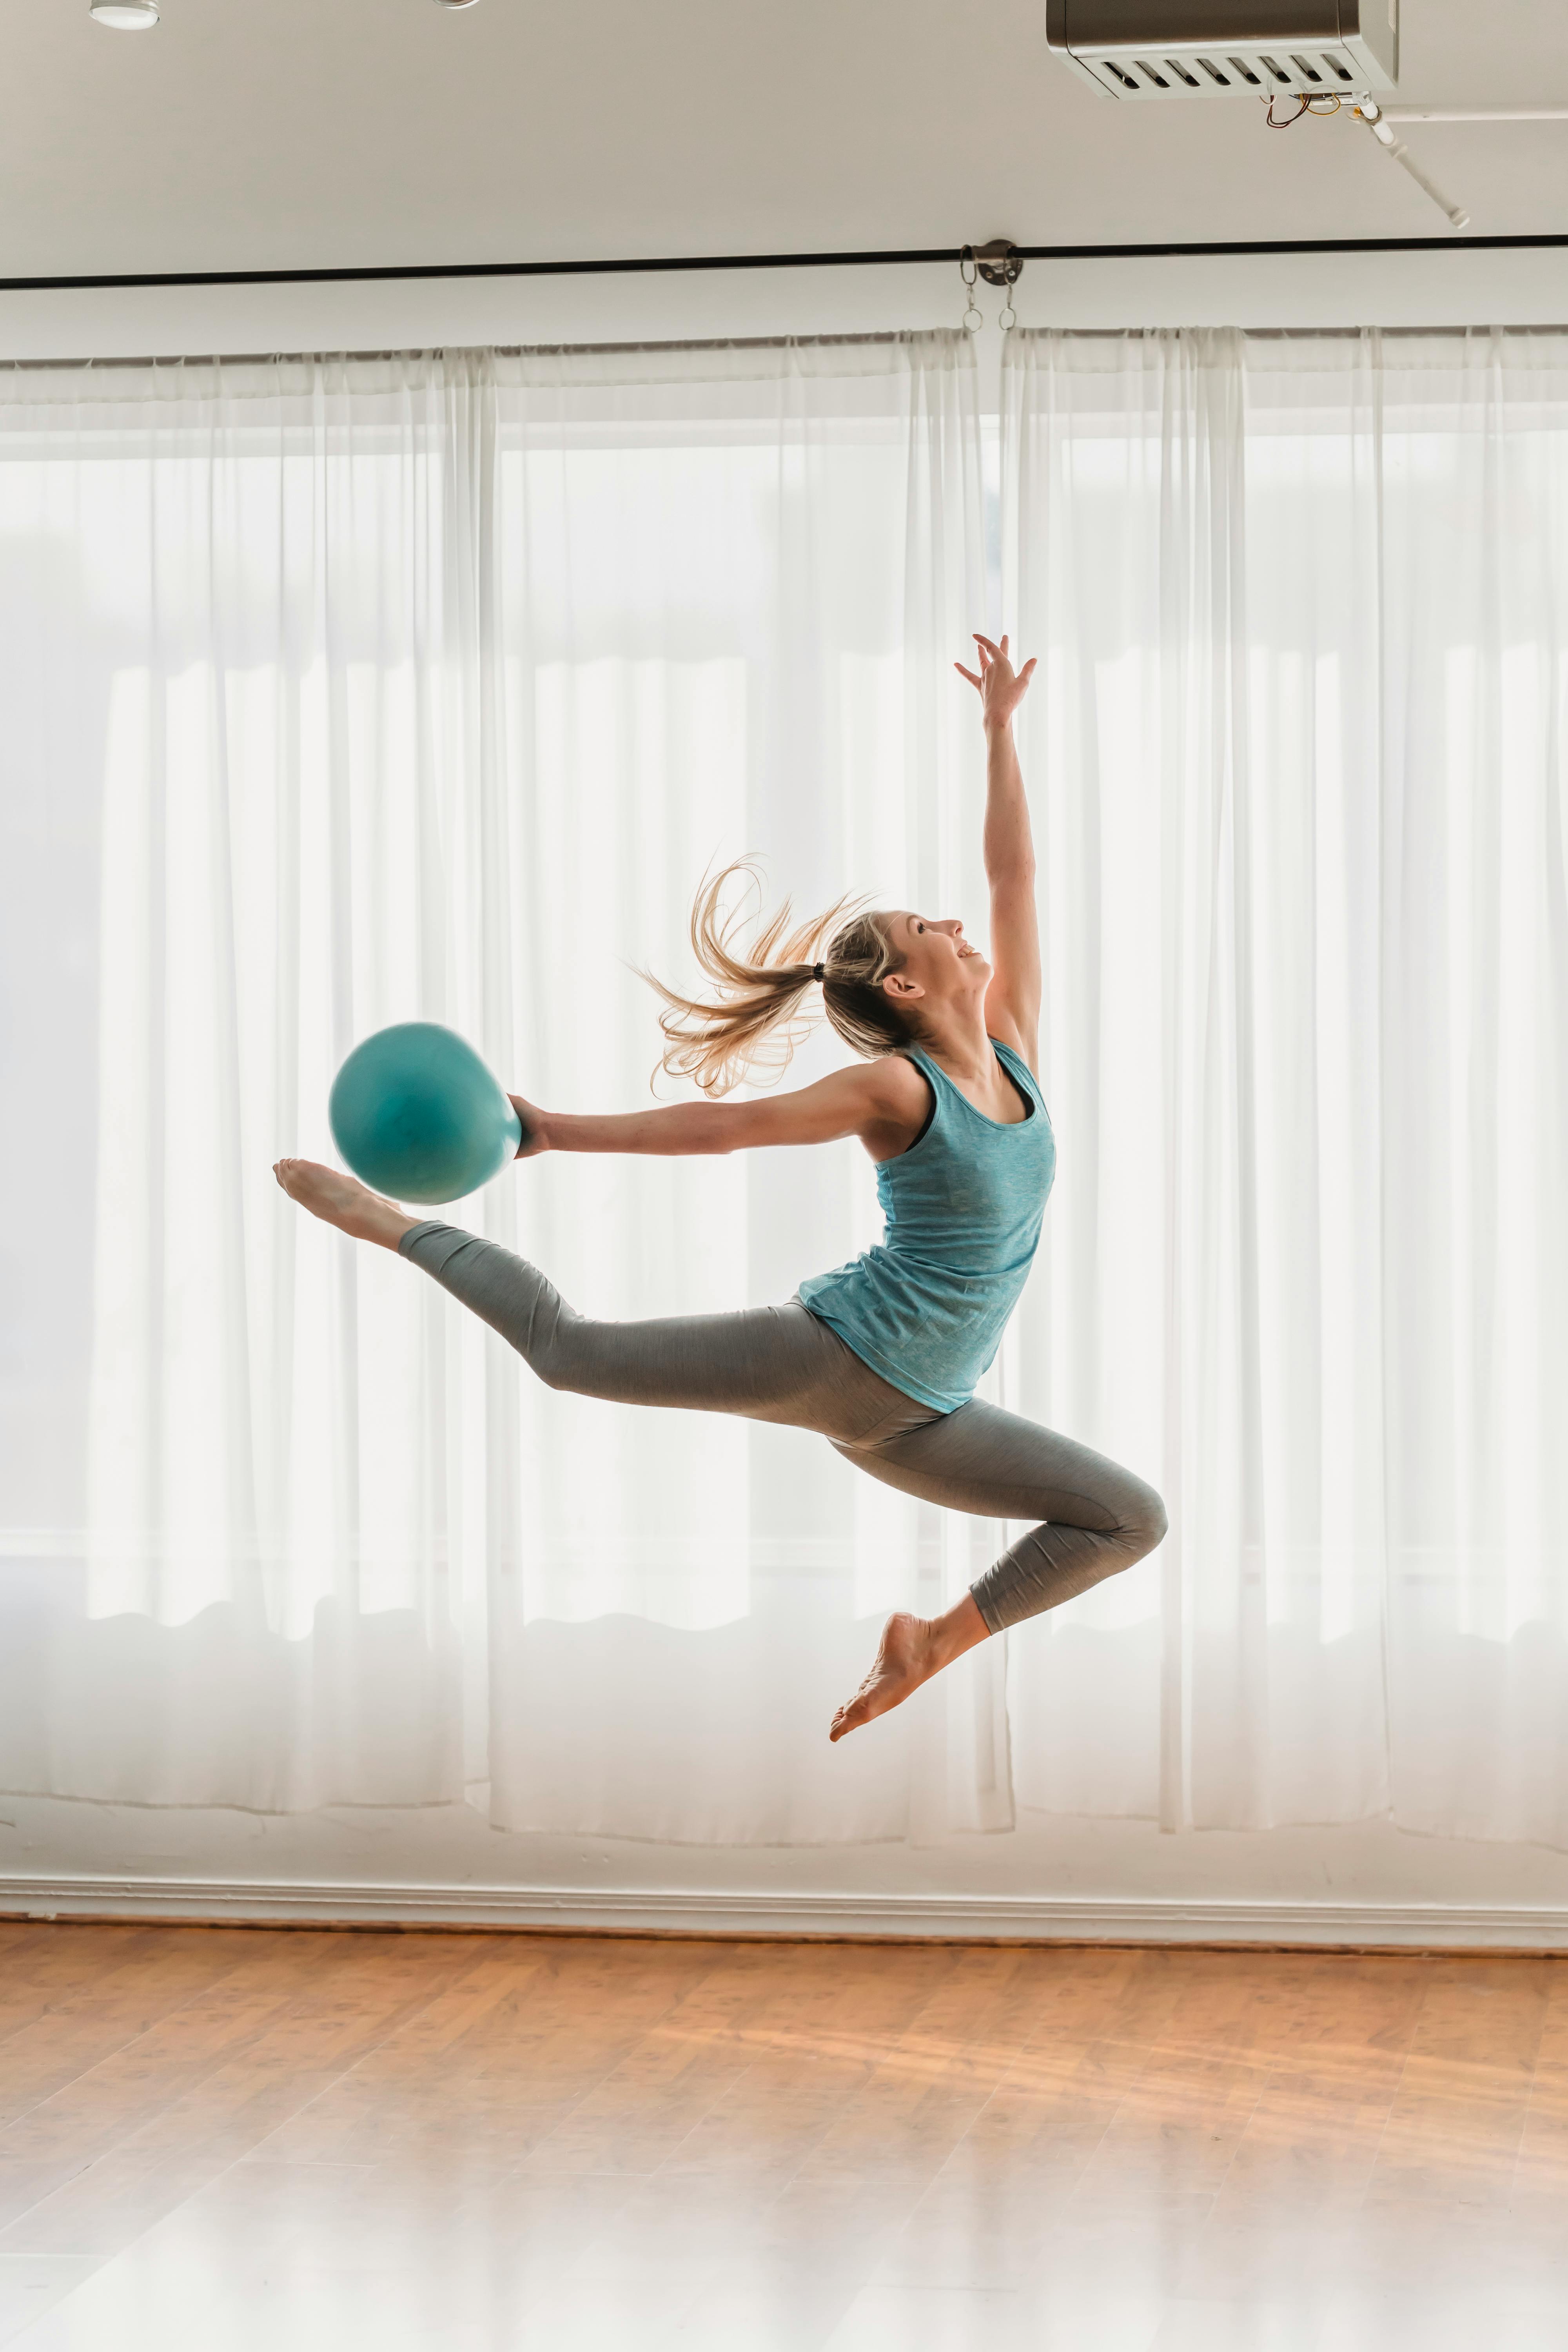 fit woman doing gymnastic exercise with fit ball